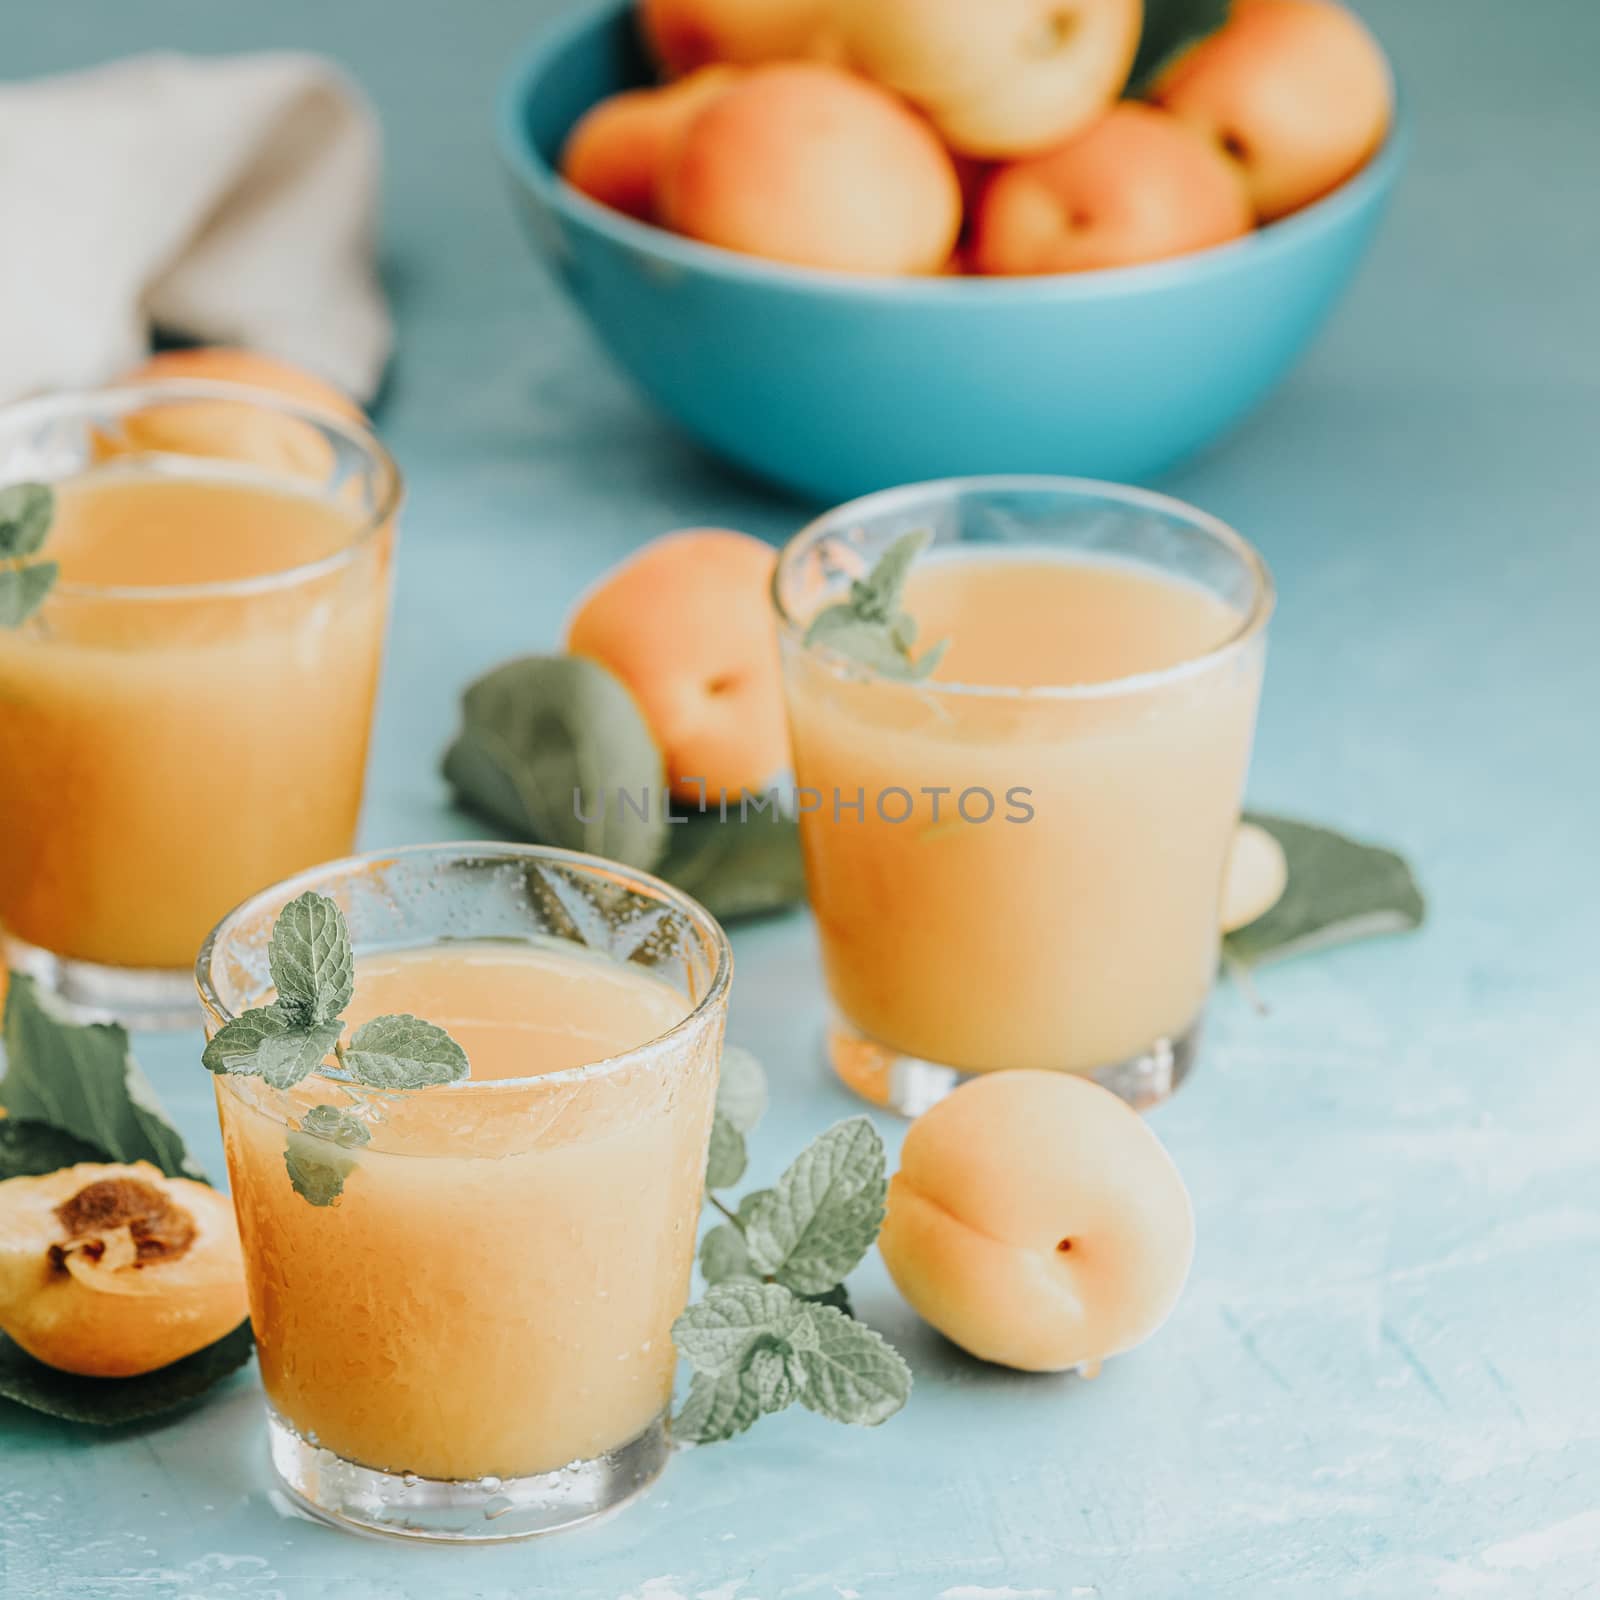 Glass of fresh healthy apricot or peach smoothie or juice on light blue concrete surface table. Sunny light. Shallow depth of the field, close up, copy space for you text